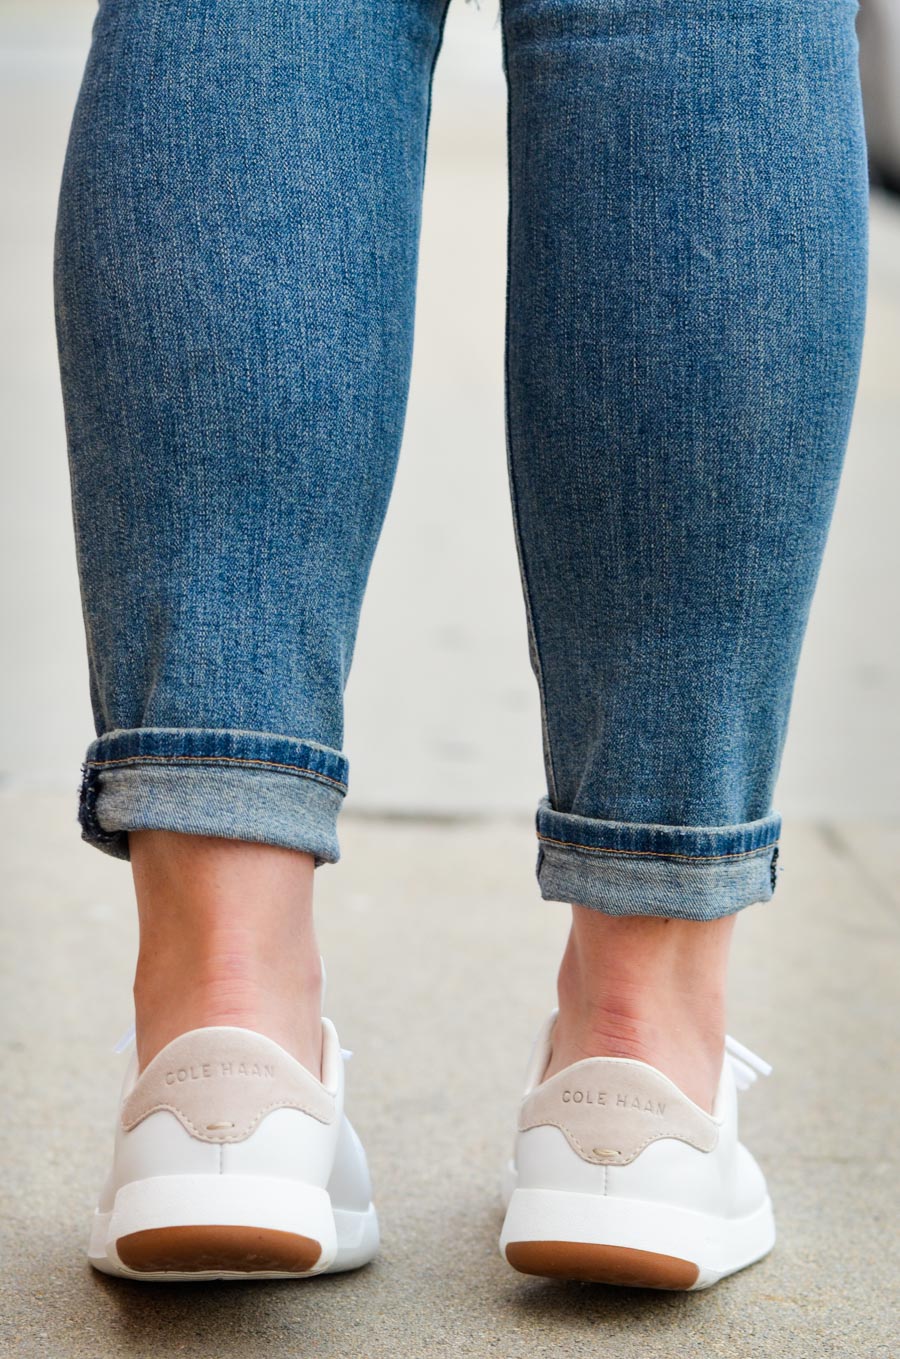 How to Wear Jeans with White Sneakers + Blazer Outfit